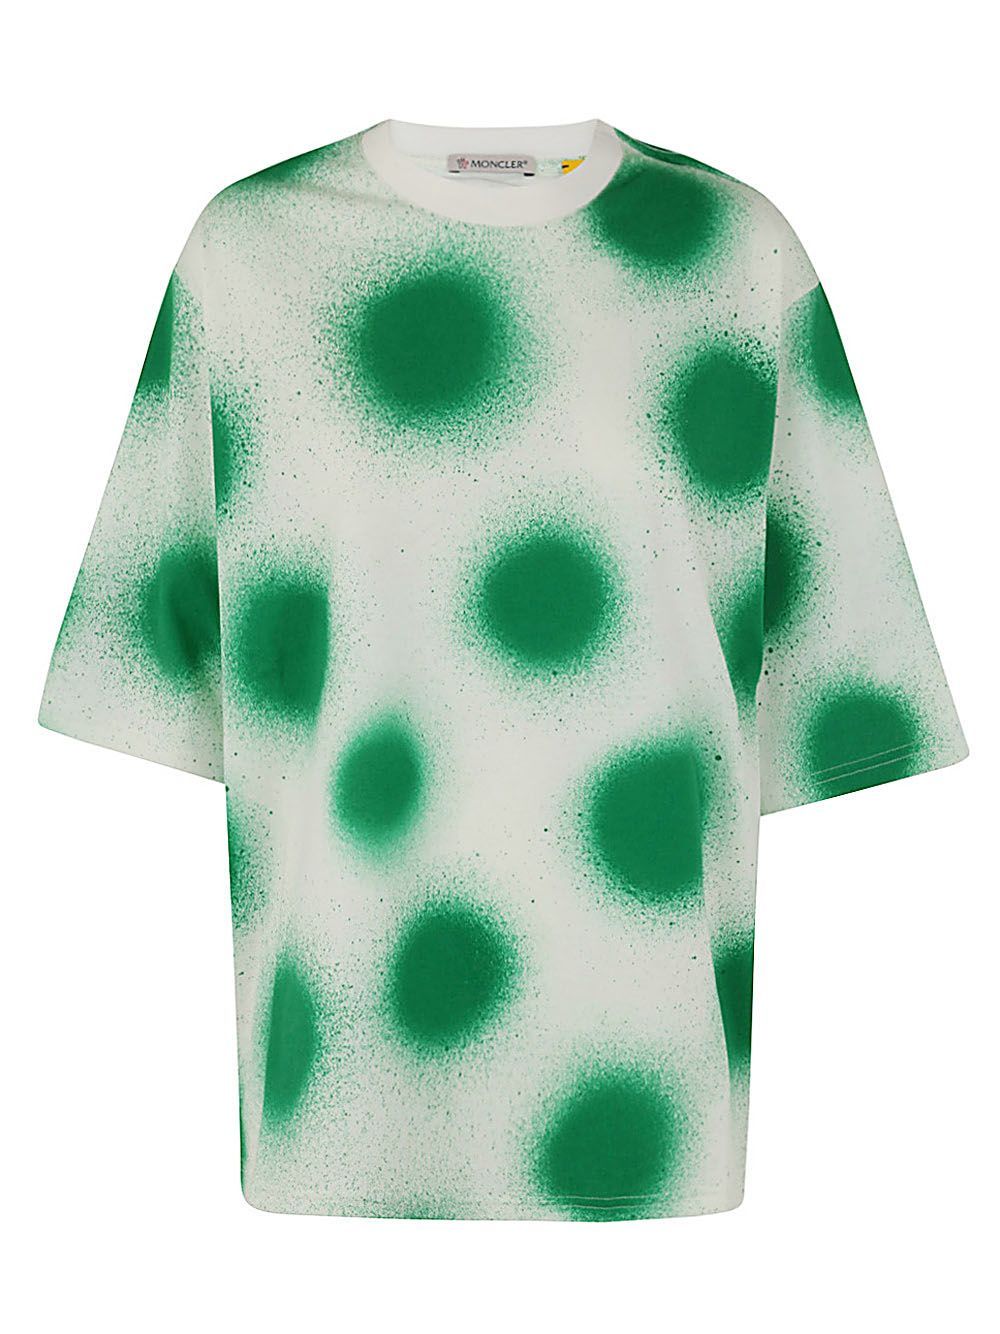 MONCLER GENIUS ABSTRACT PATTERNED SS T SHIRT,09E.8C000.03.829JS